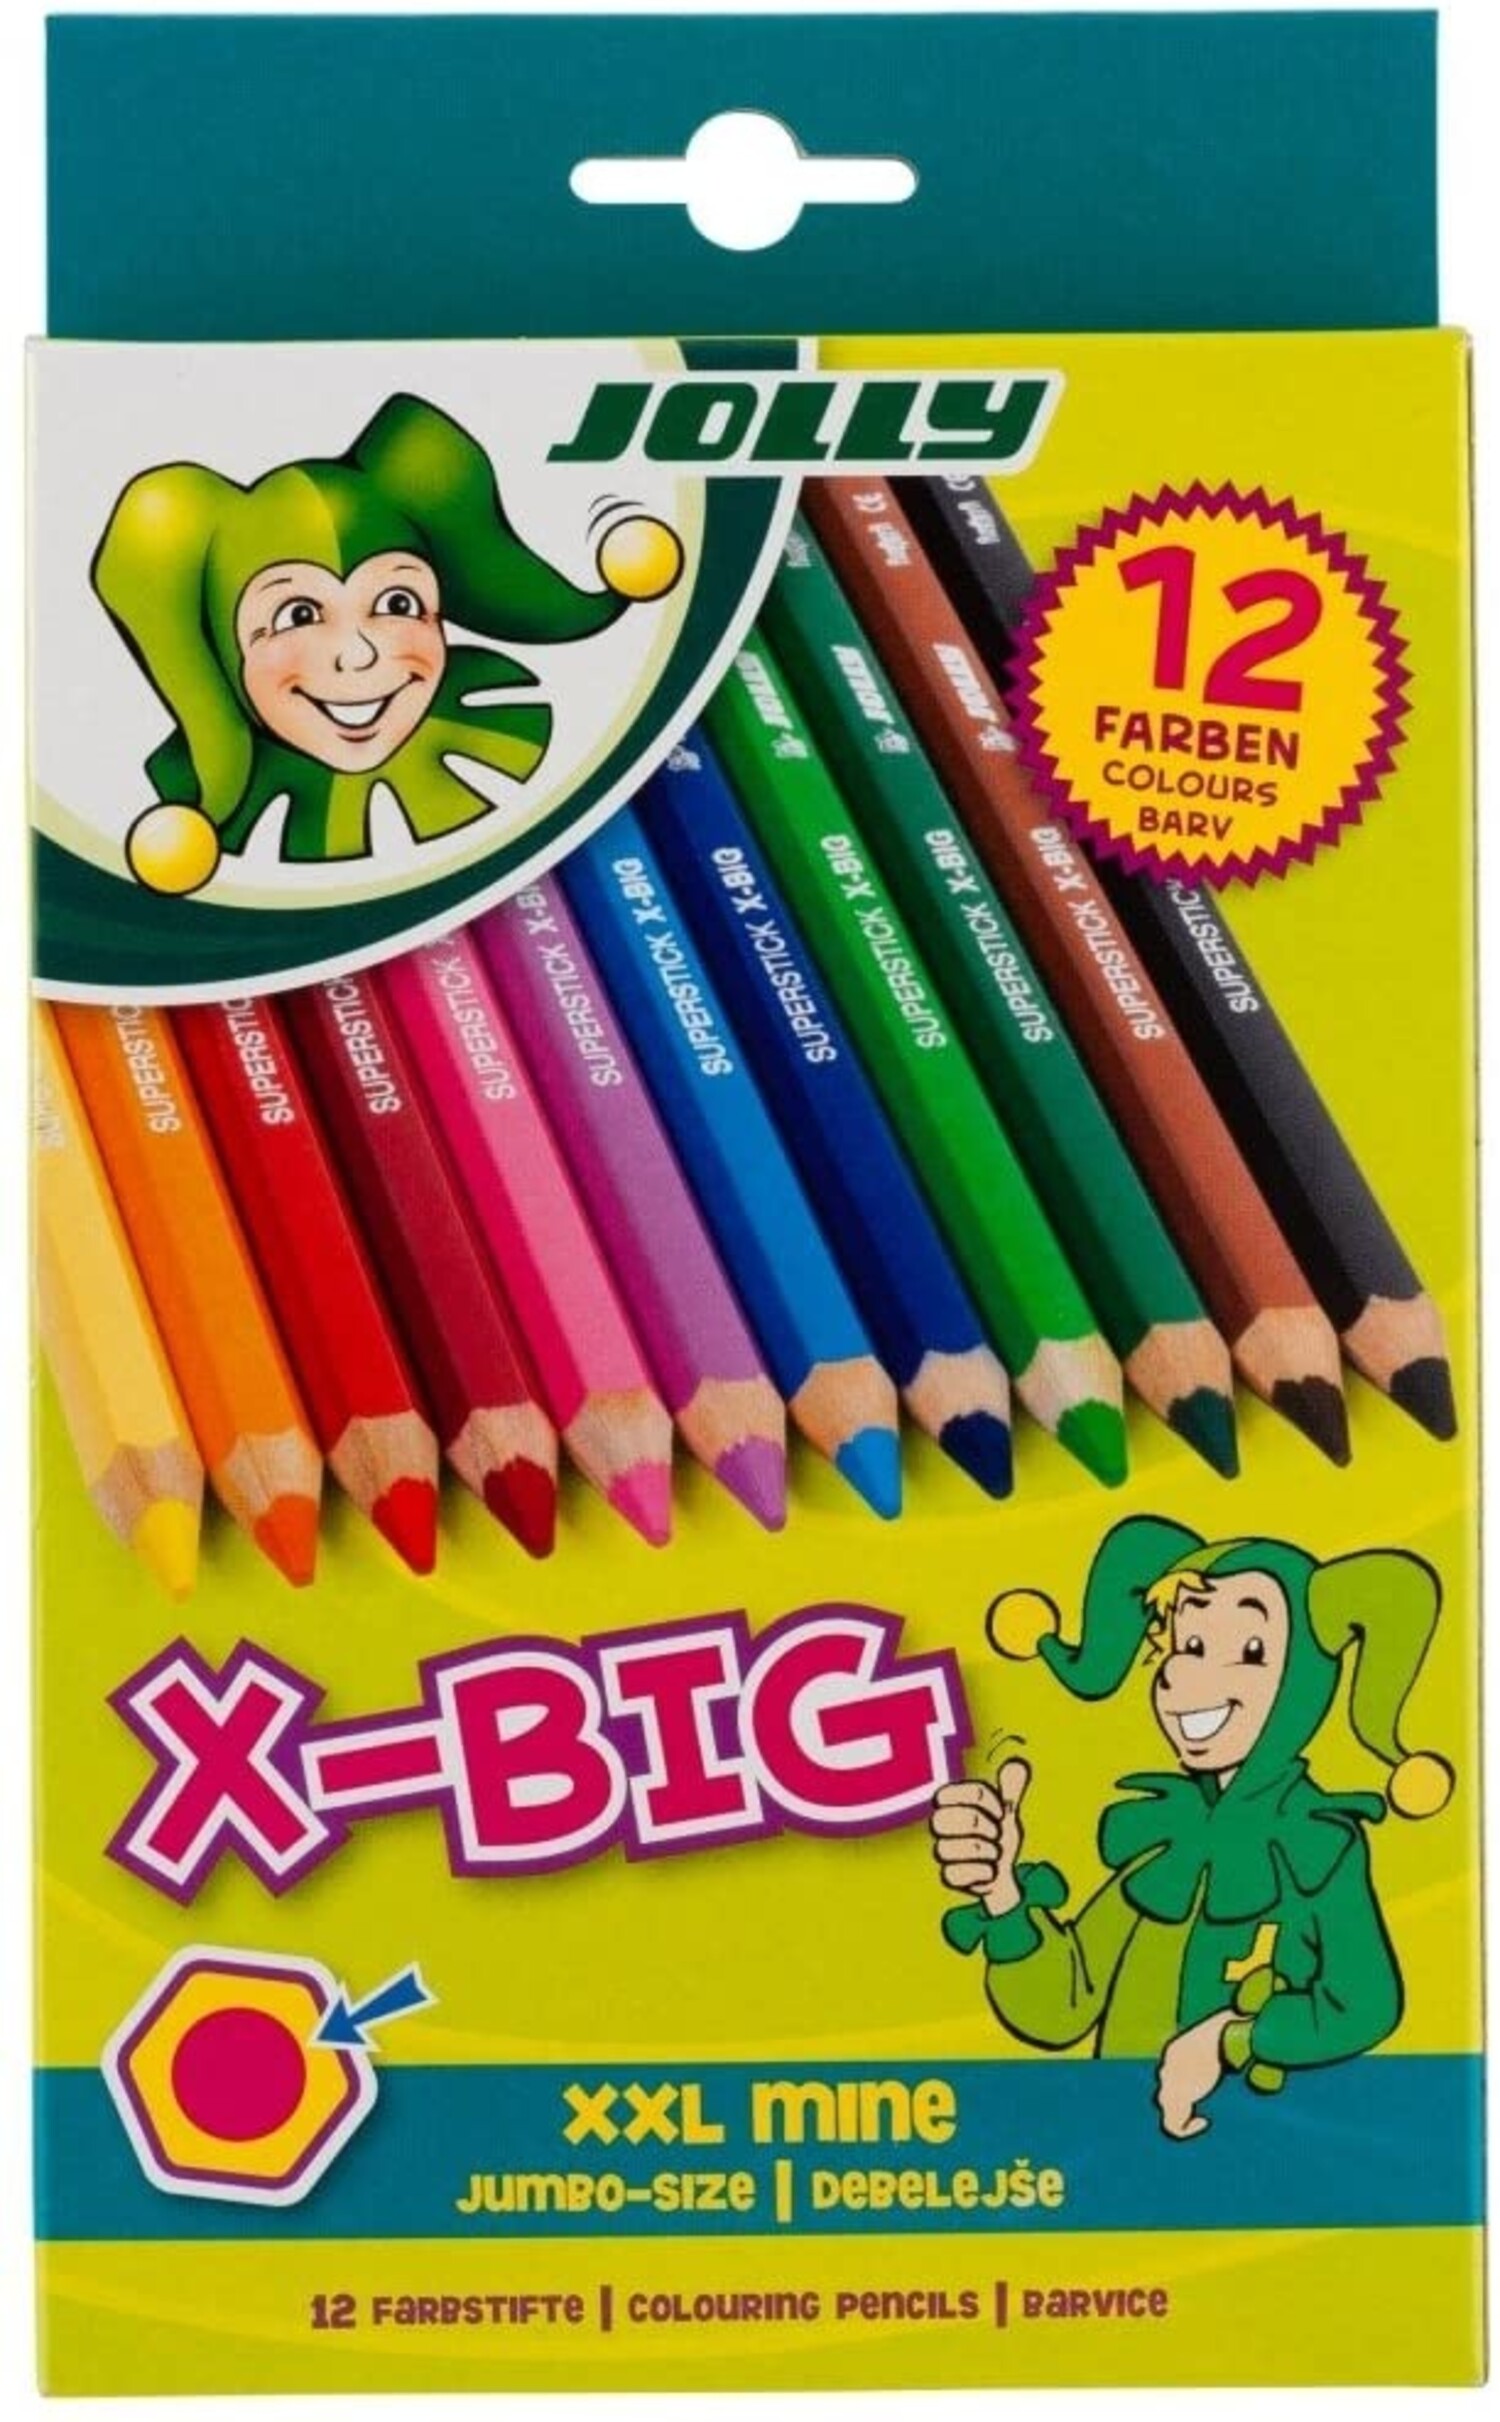 Jolly Superstick Colored Pencil Sets